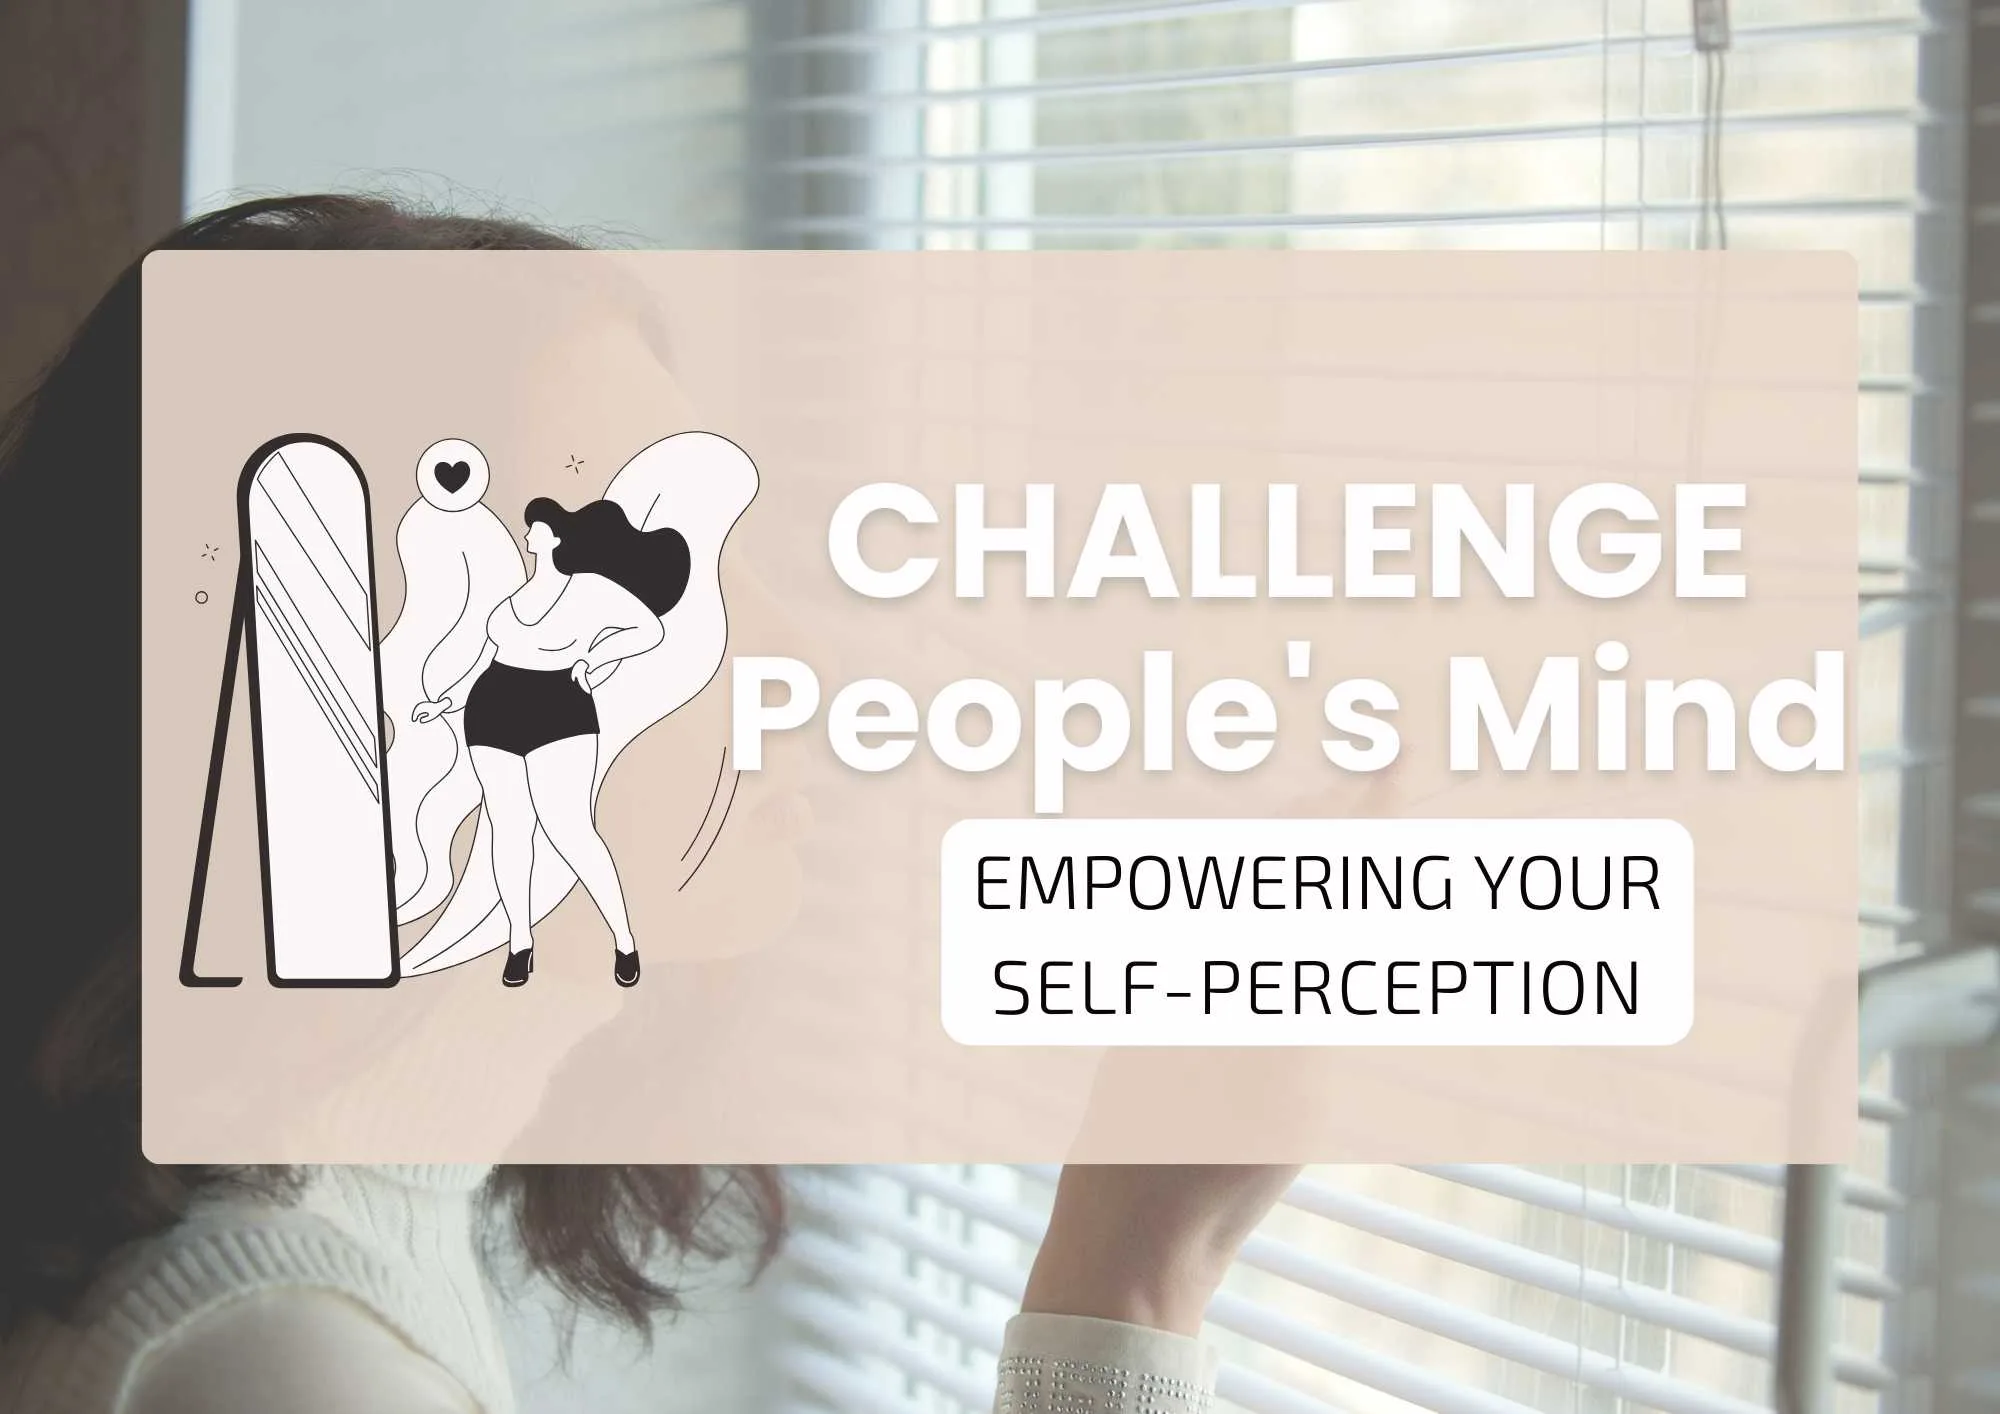 Empowering Your Self-Perception